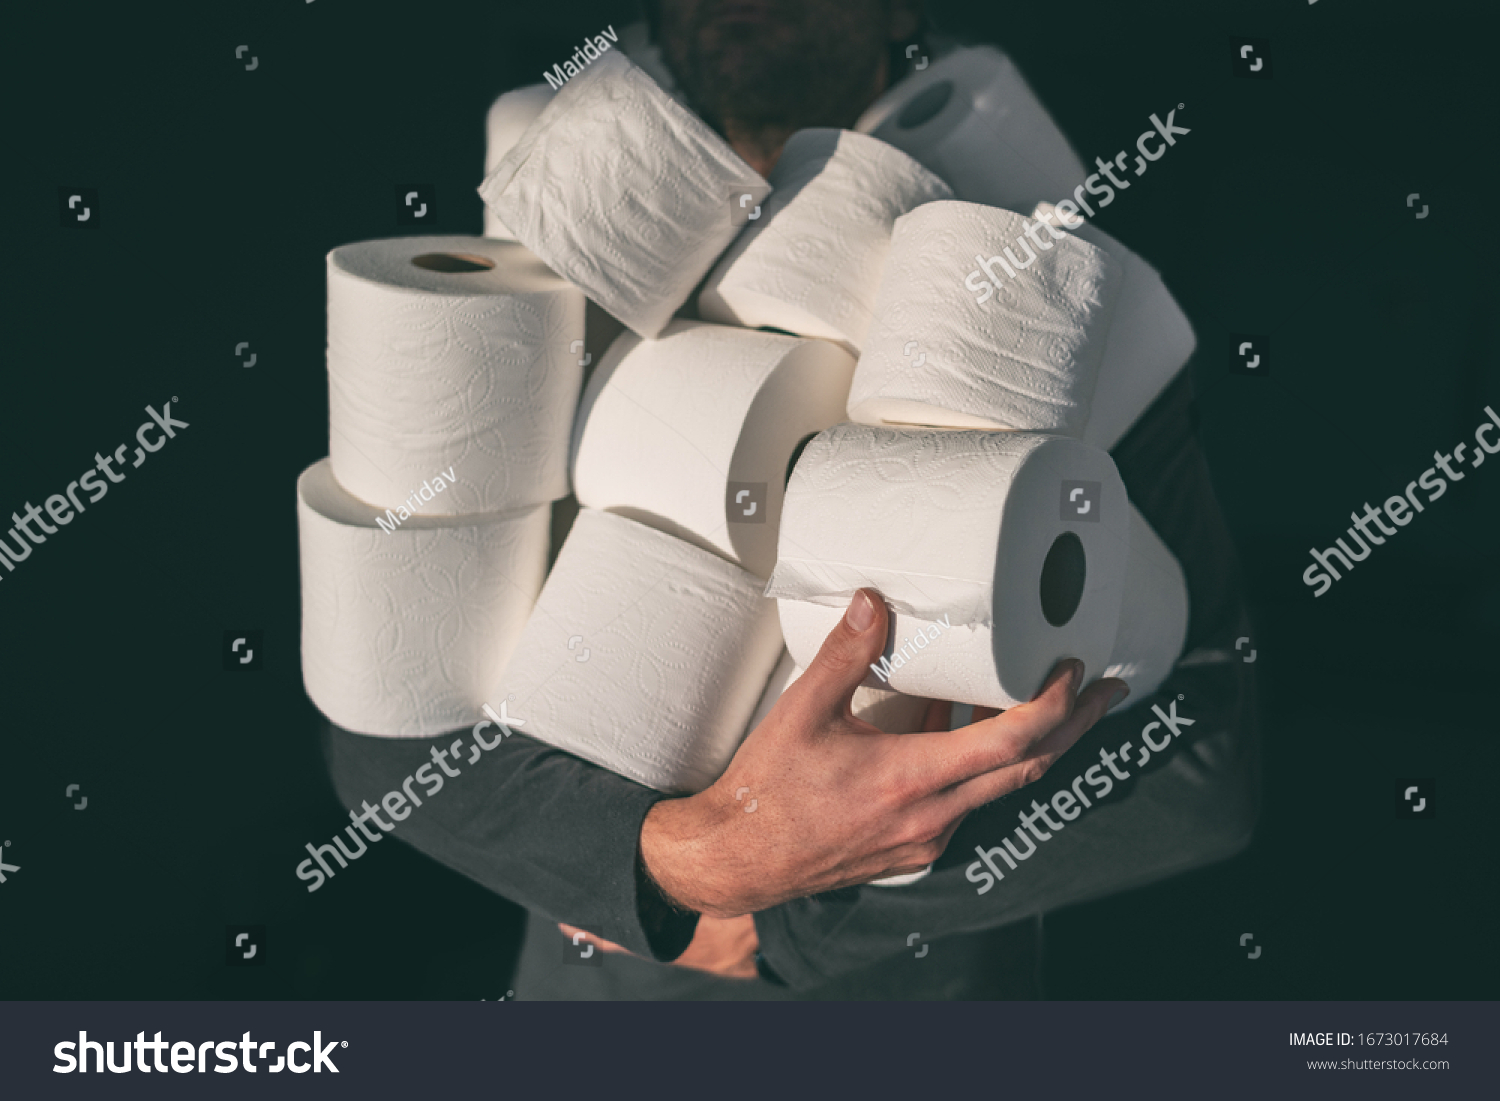 Toilet paper shortage coronavirus panic buying man hoarding carrying many rolls at home in fear of corona virus outbreak closing shopping stores. #1673017684